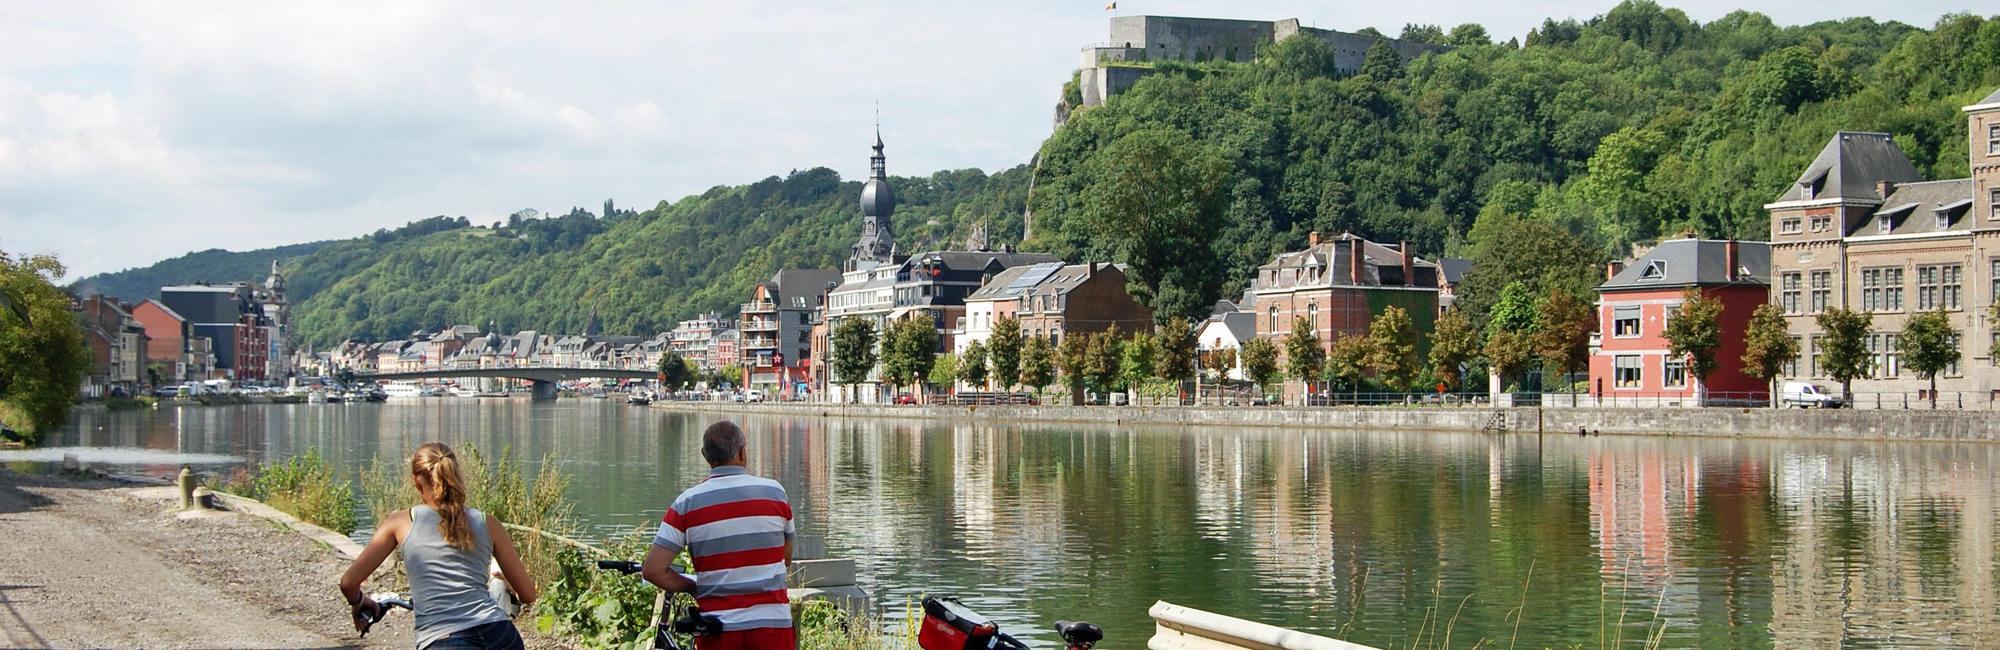 Dutch Bike Tours Cycling holiday Along the Meuse from Maastricht to Sedan